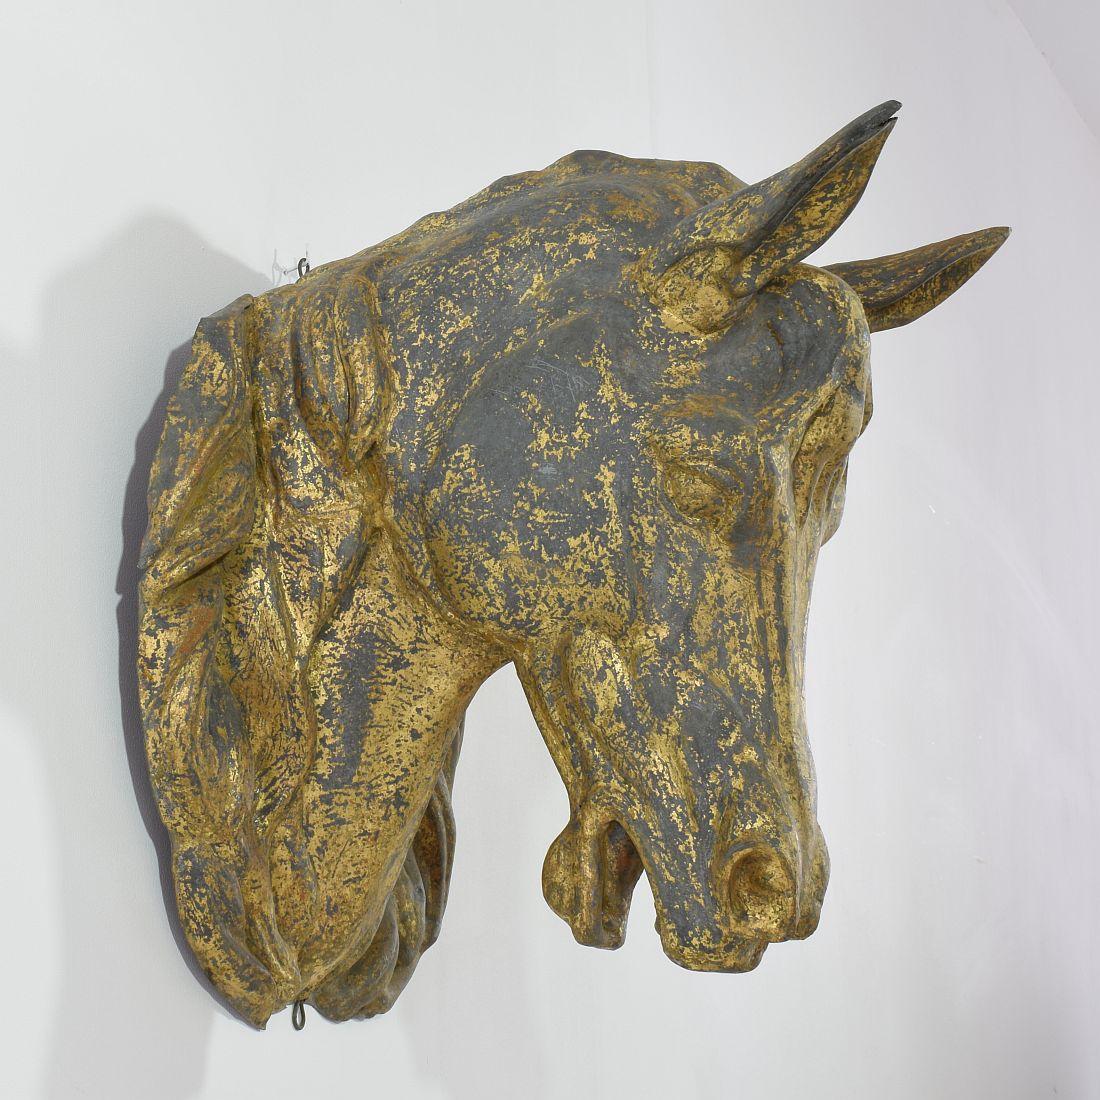 A beautiful French gilt zinc decorative horse head from the late 19th century with great details on the mane and musculature.
France, circa 1880-1900. Beautiful weathered and small losses. More pictures available on request.